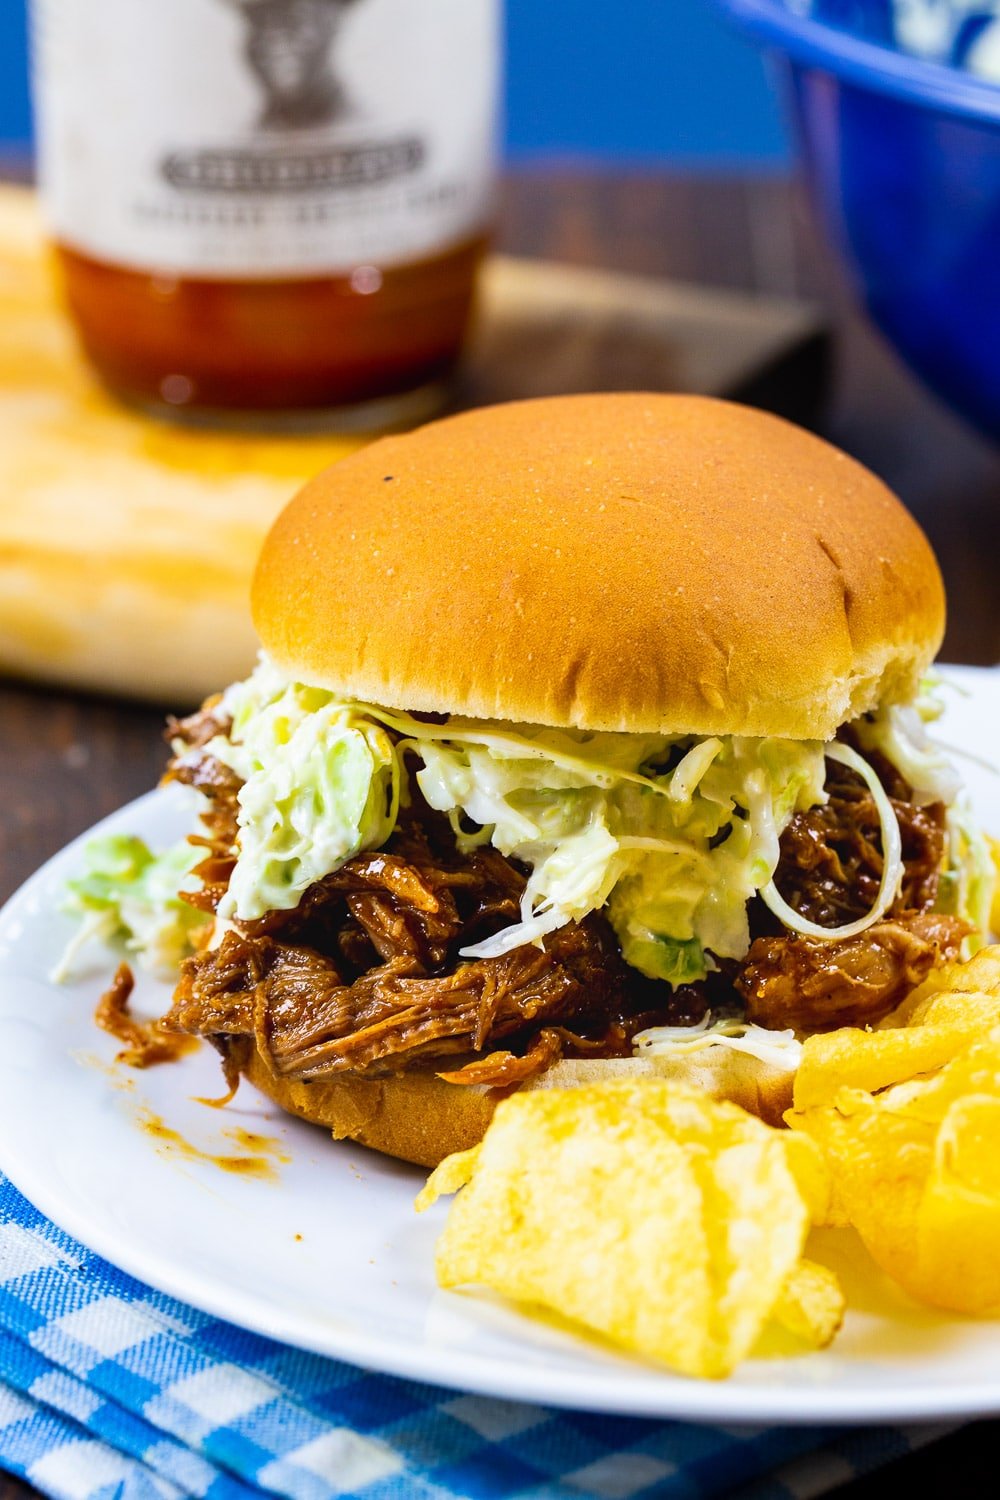 Smokey Pulled Pork on a bun with coleslaw.